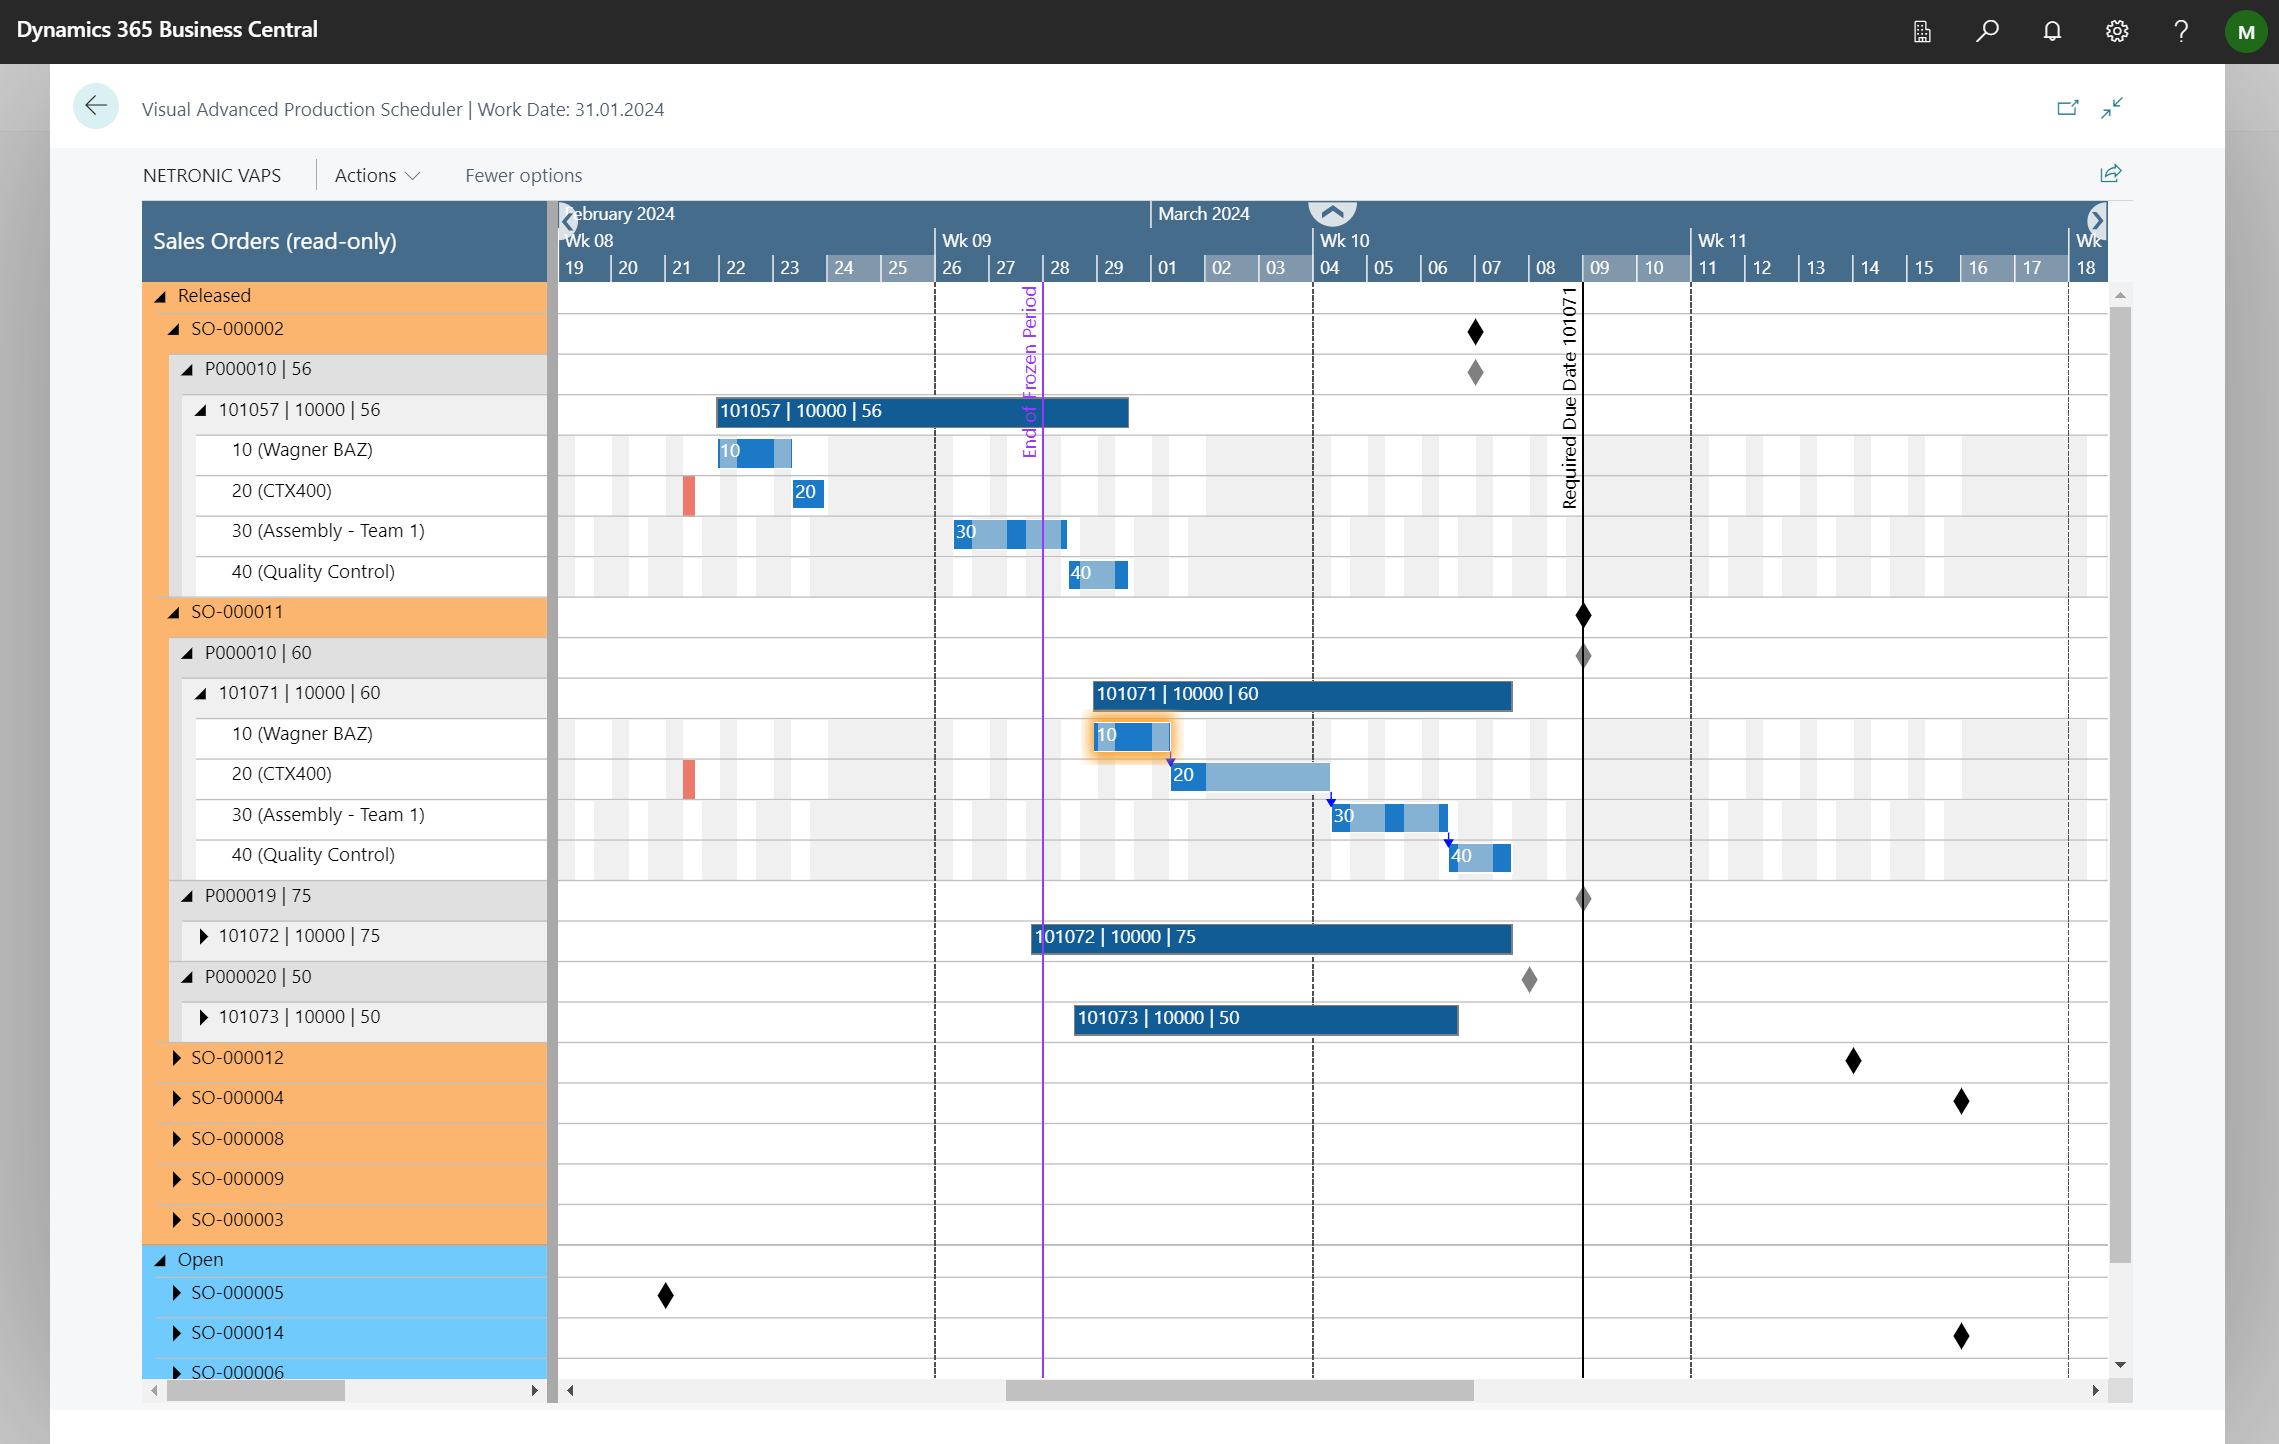 Configure-to-order production scheduling - VAPS - Sales Order View